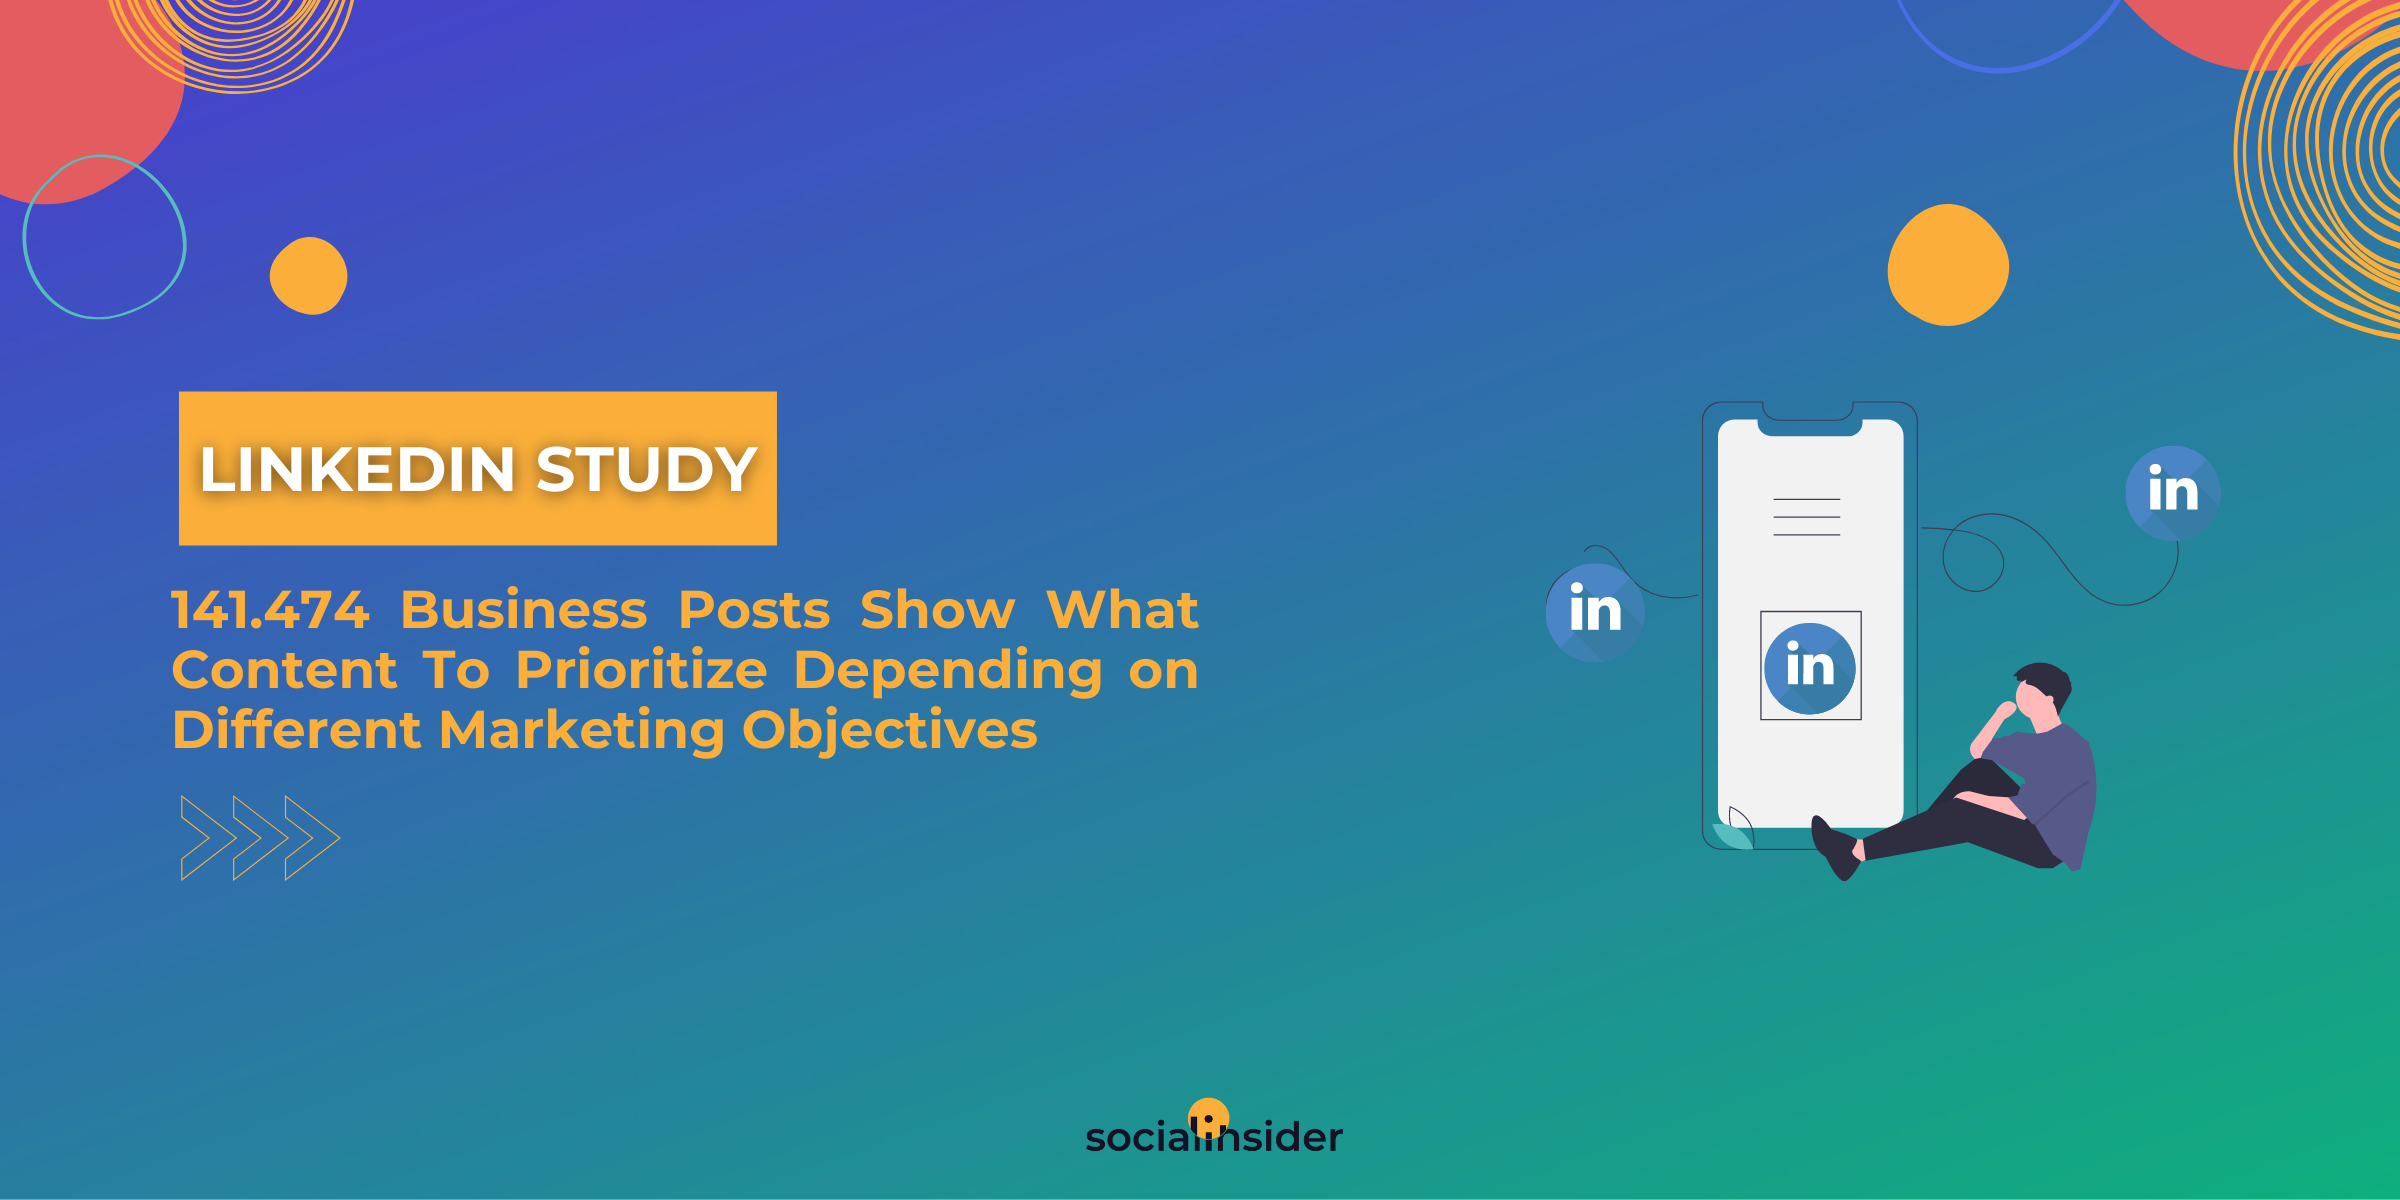 [Study] LinkedIn Content Research: 141.474 Business Posts Show the Best LinkedIn Content Strategy for B2B Marketing